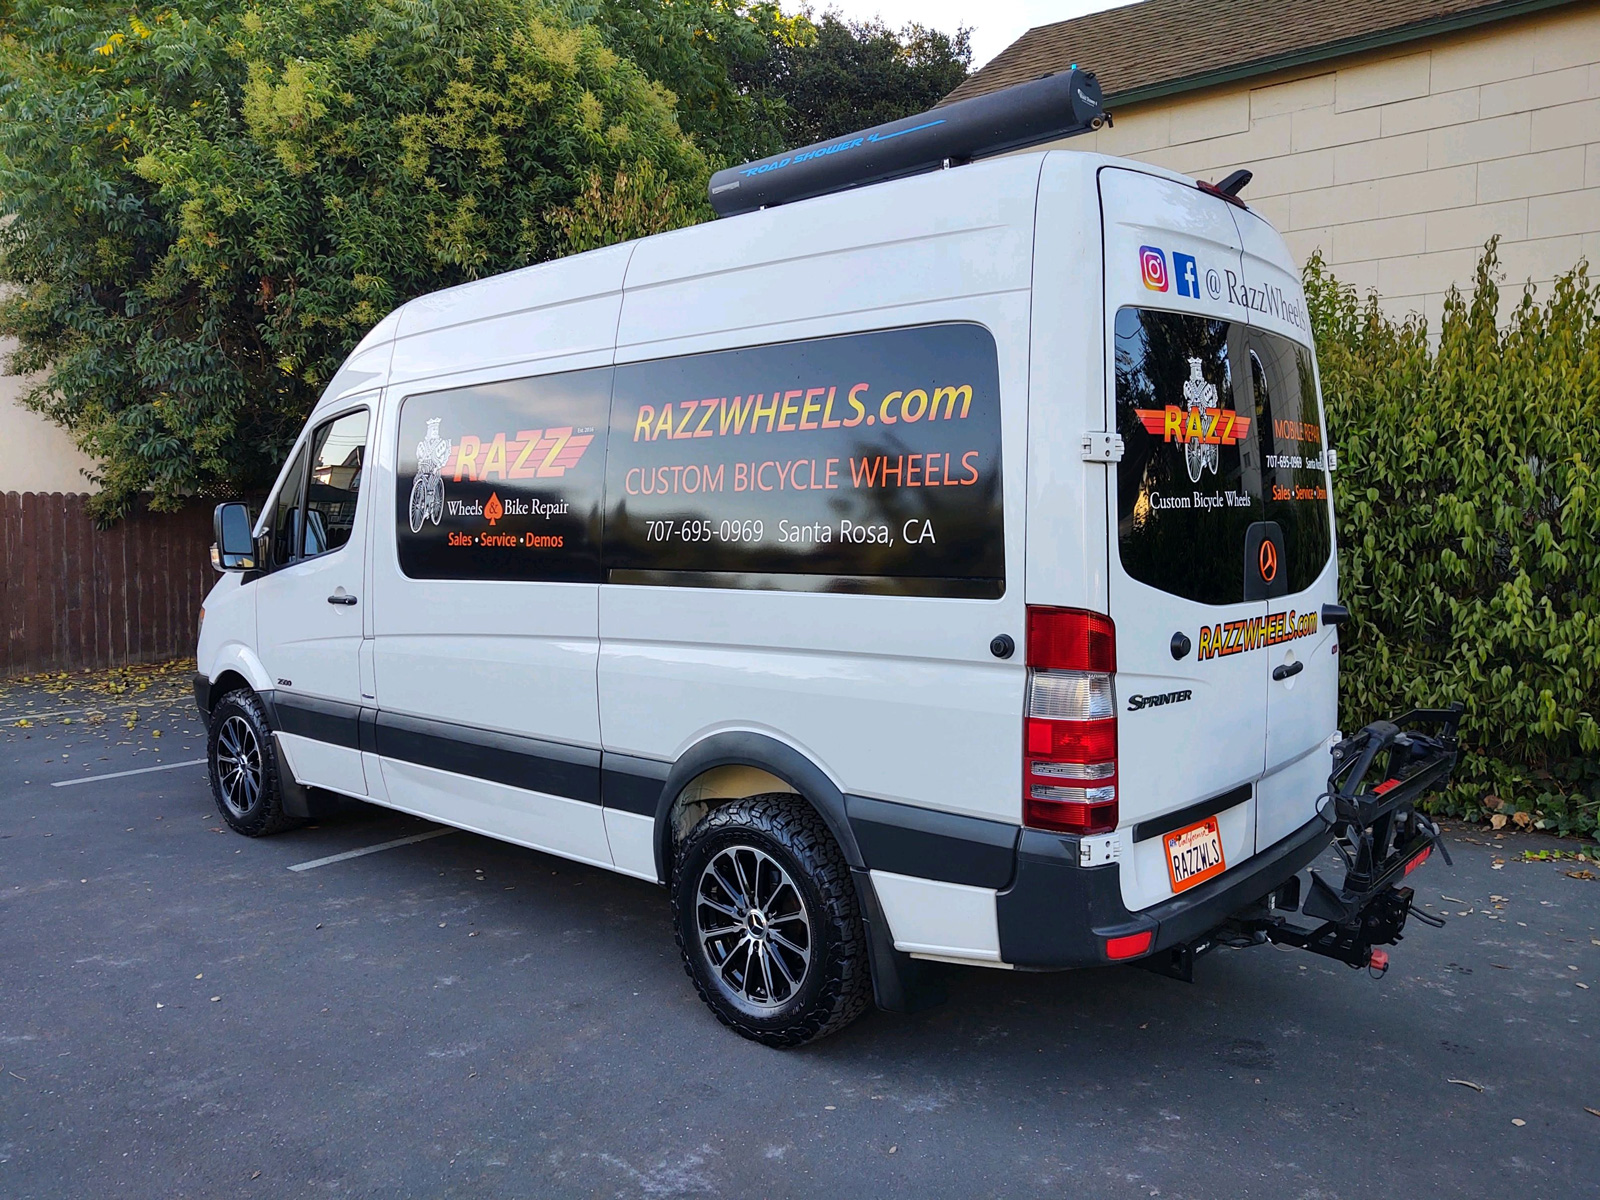 Mobile bicycle repair in Sonoma County, CA.